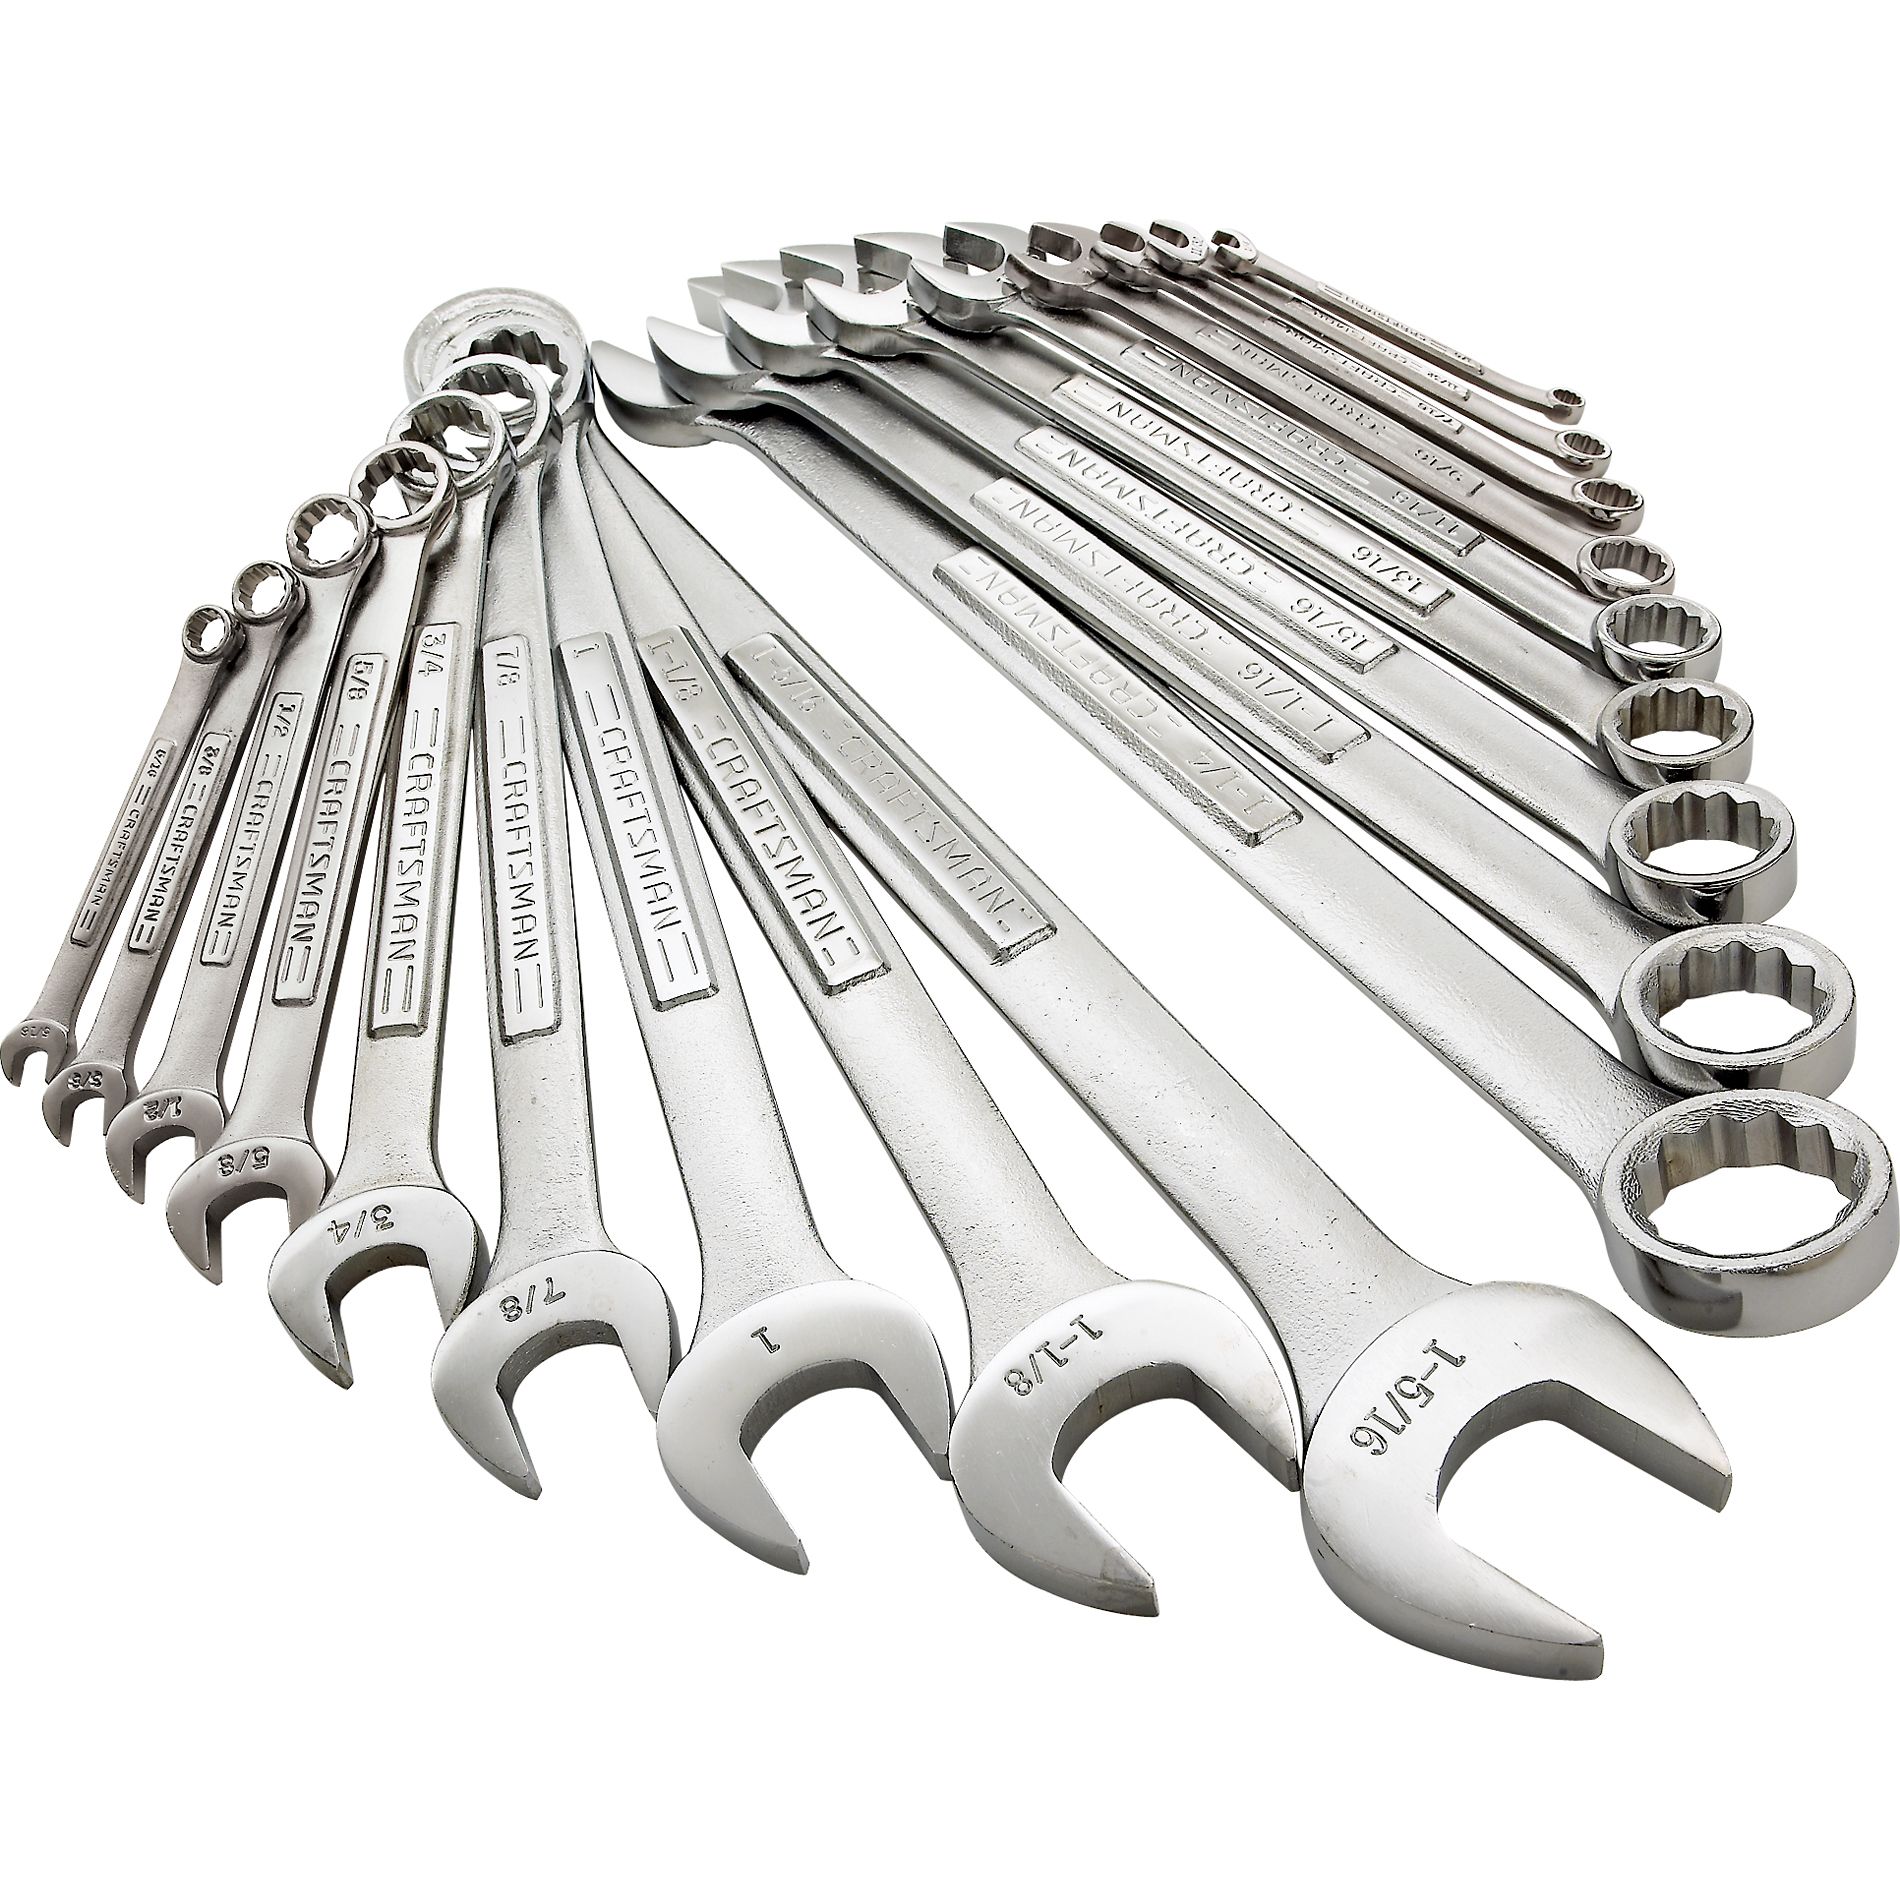 Craftsman 18 pc. Combination Inch Wrench Set | Shop Your Way: Online